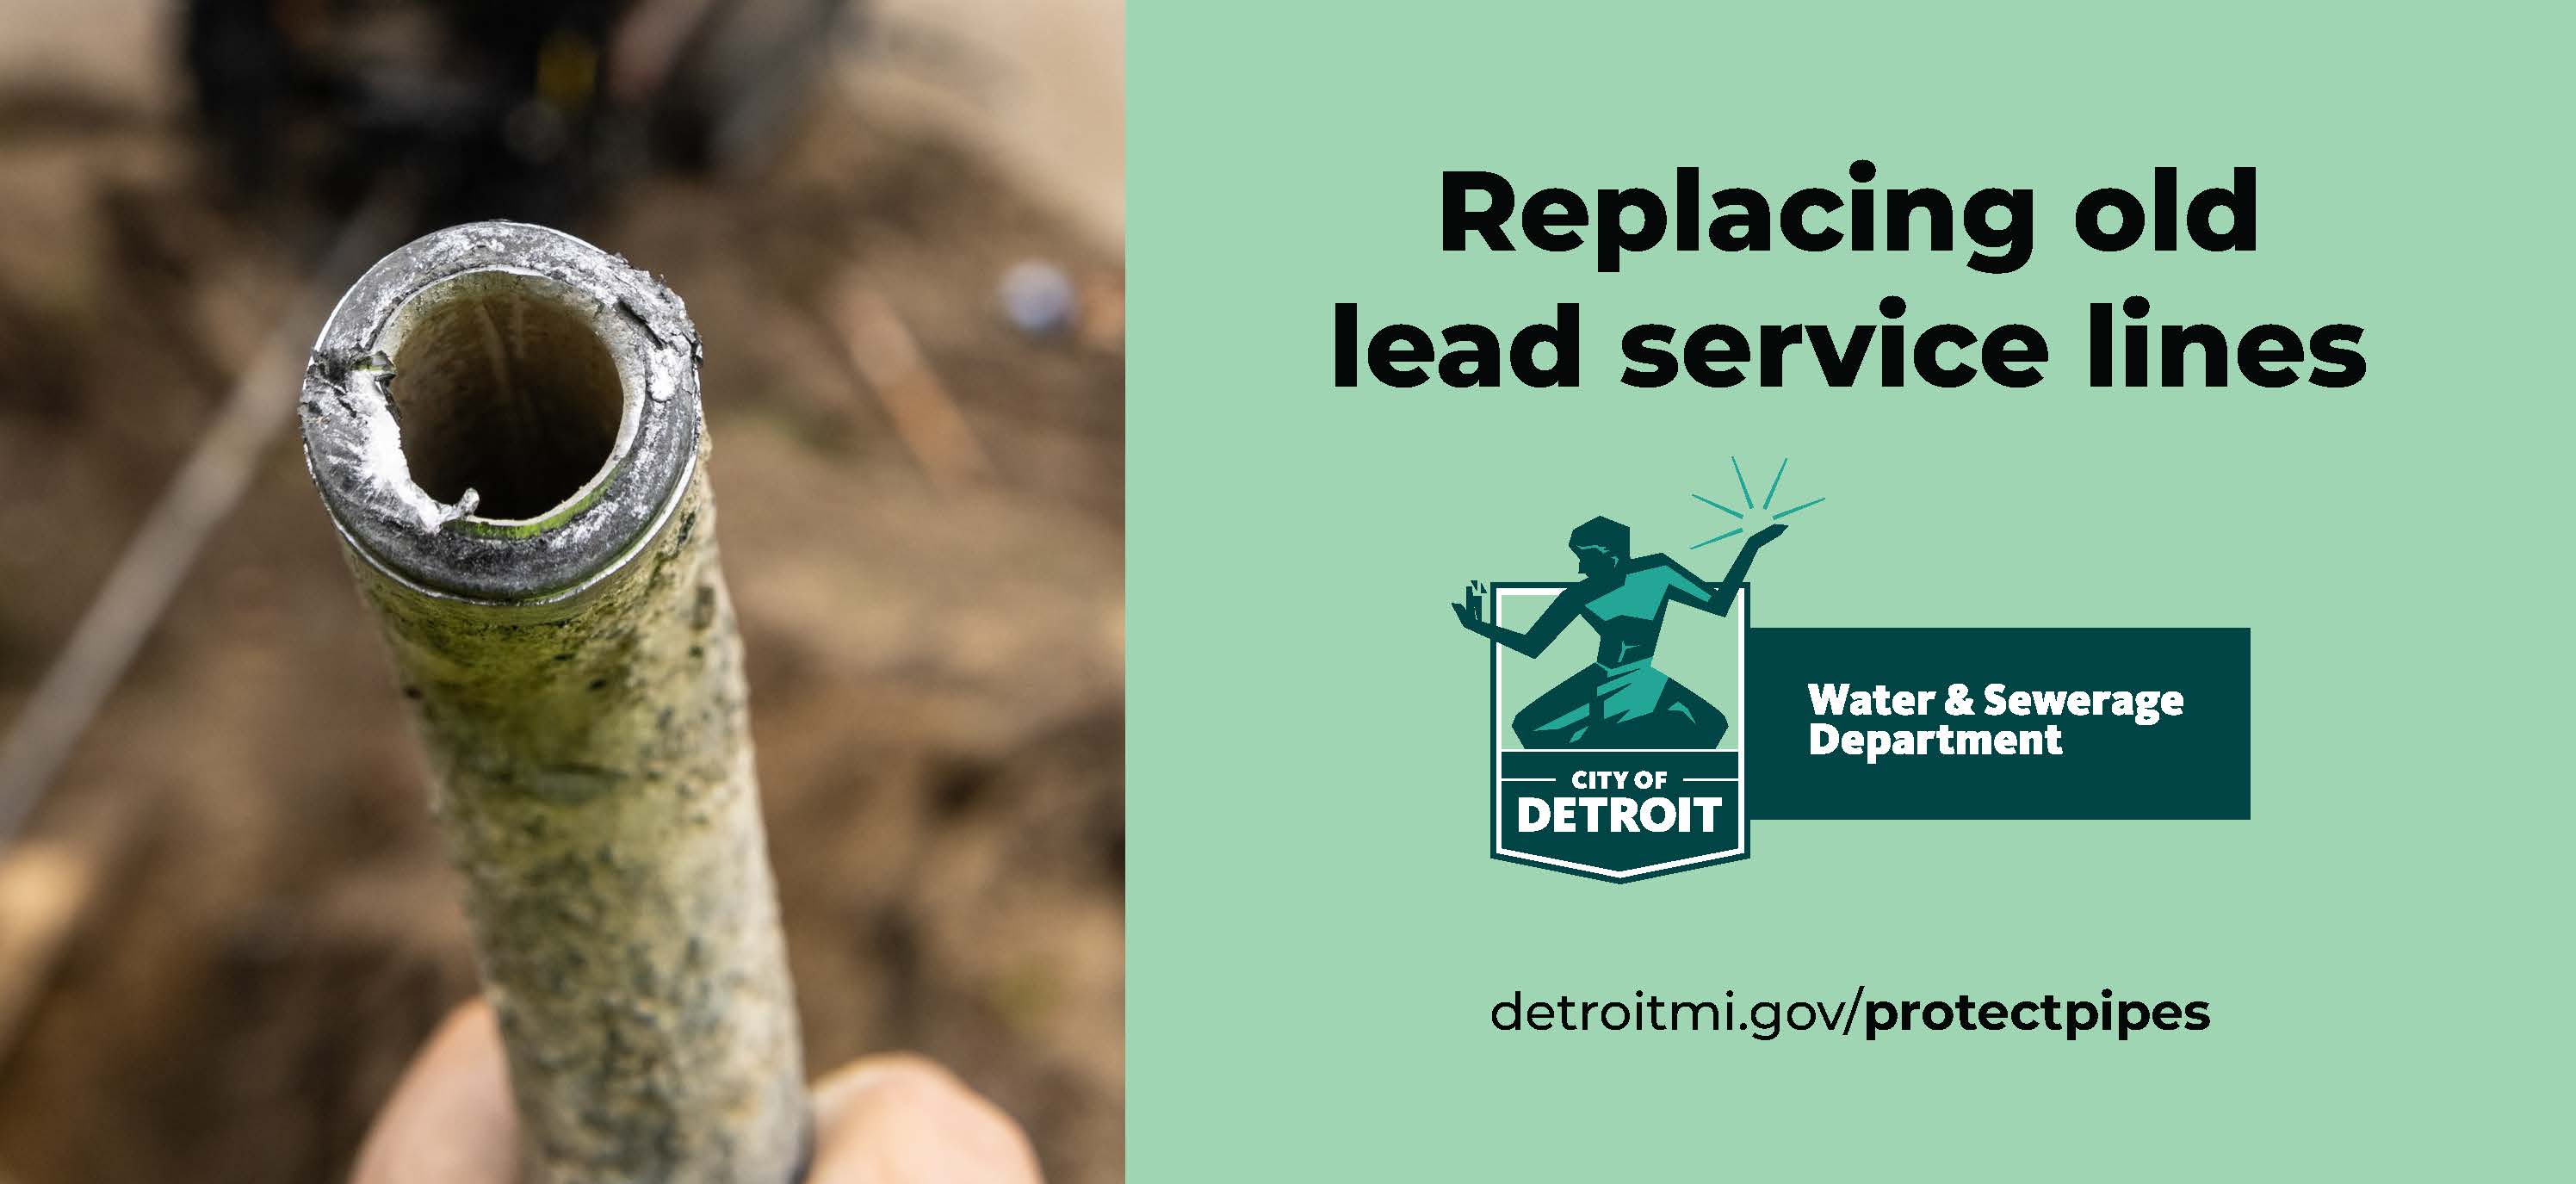 Replacing Lead Service Lines